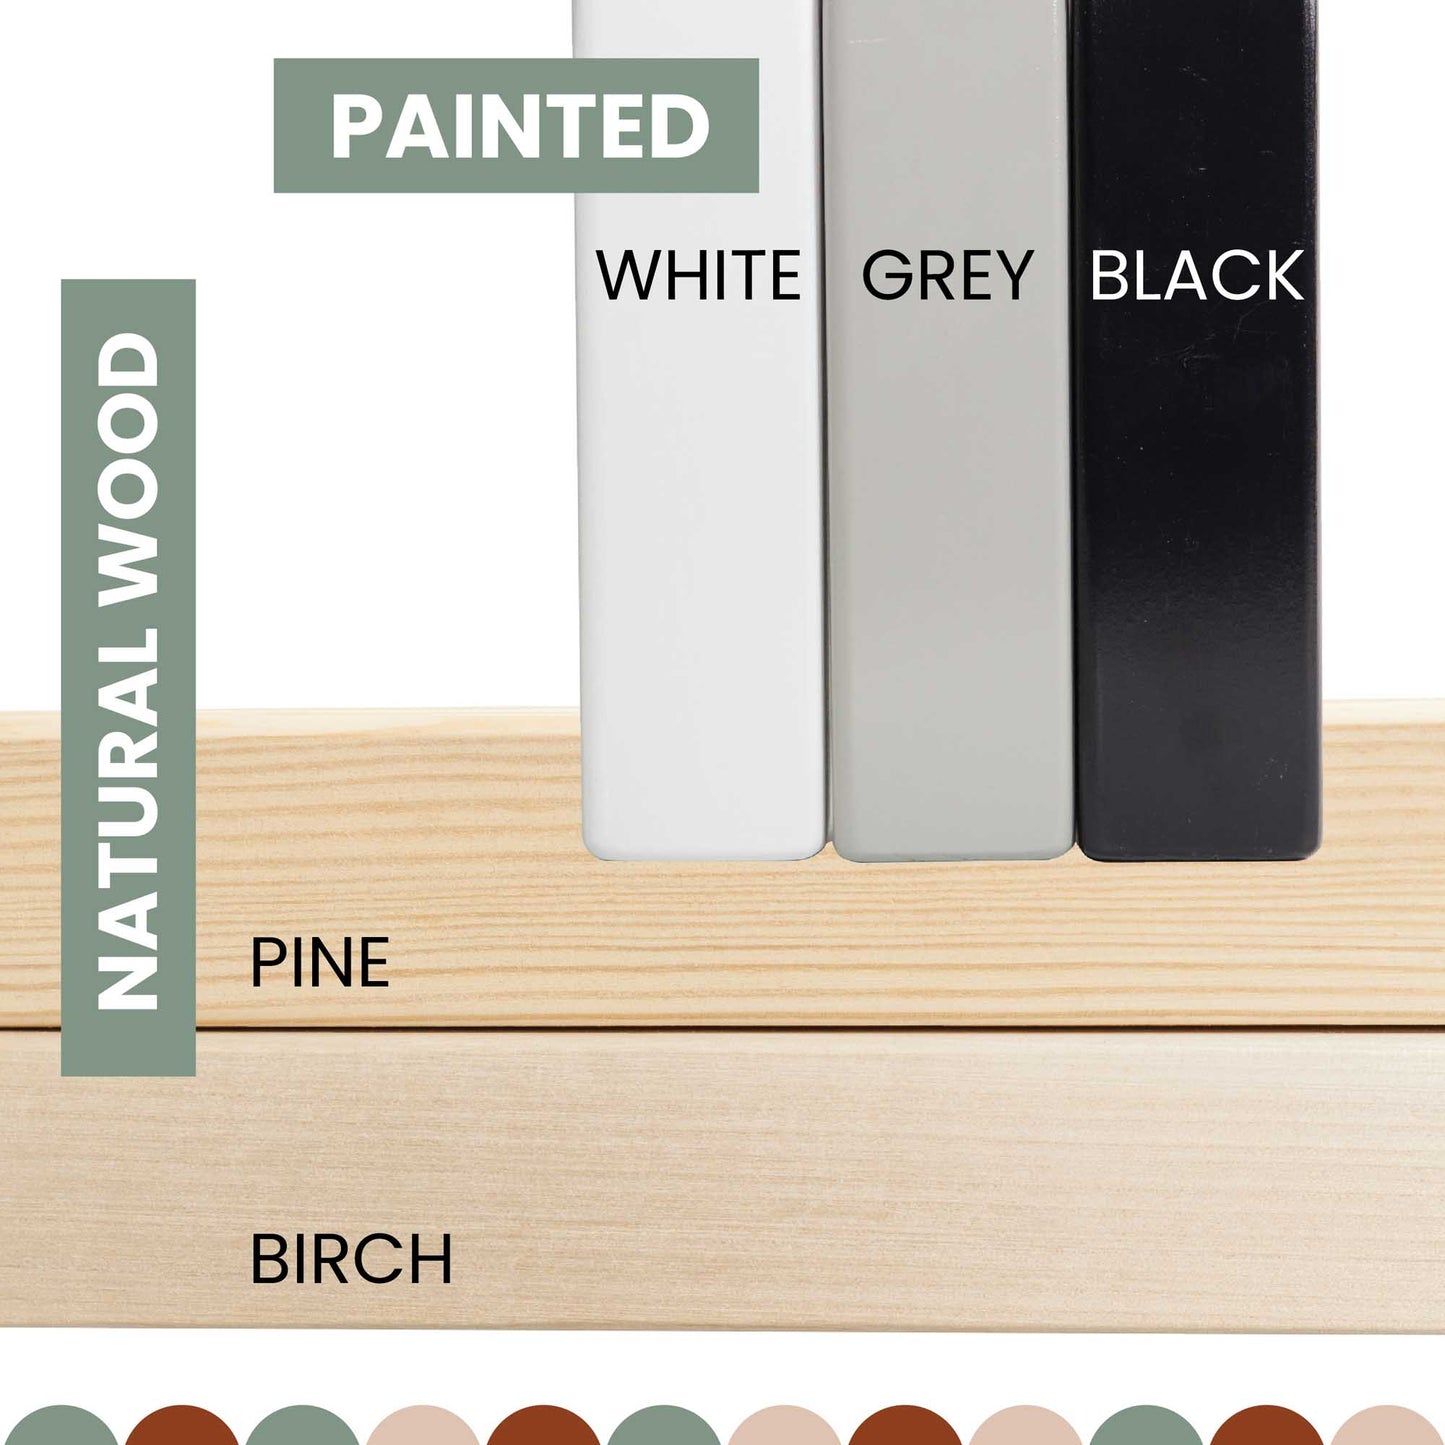 The pine, birch, and white wooden Montessori wardrobe is designed according to Montessori principles and is ideal for organizing a children's wardrobe.